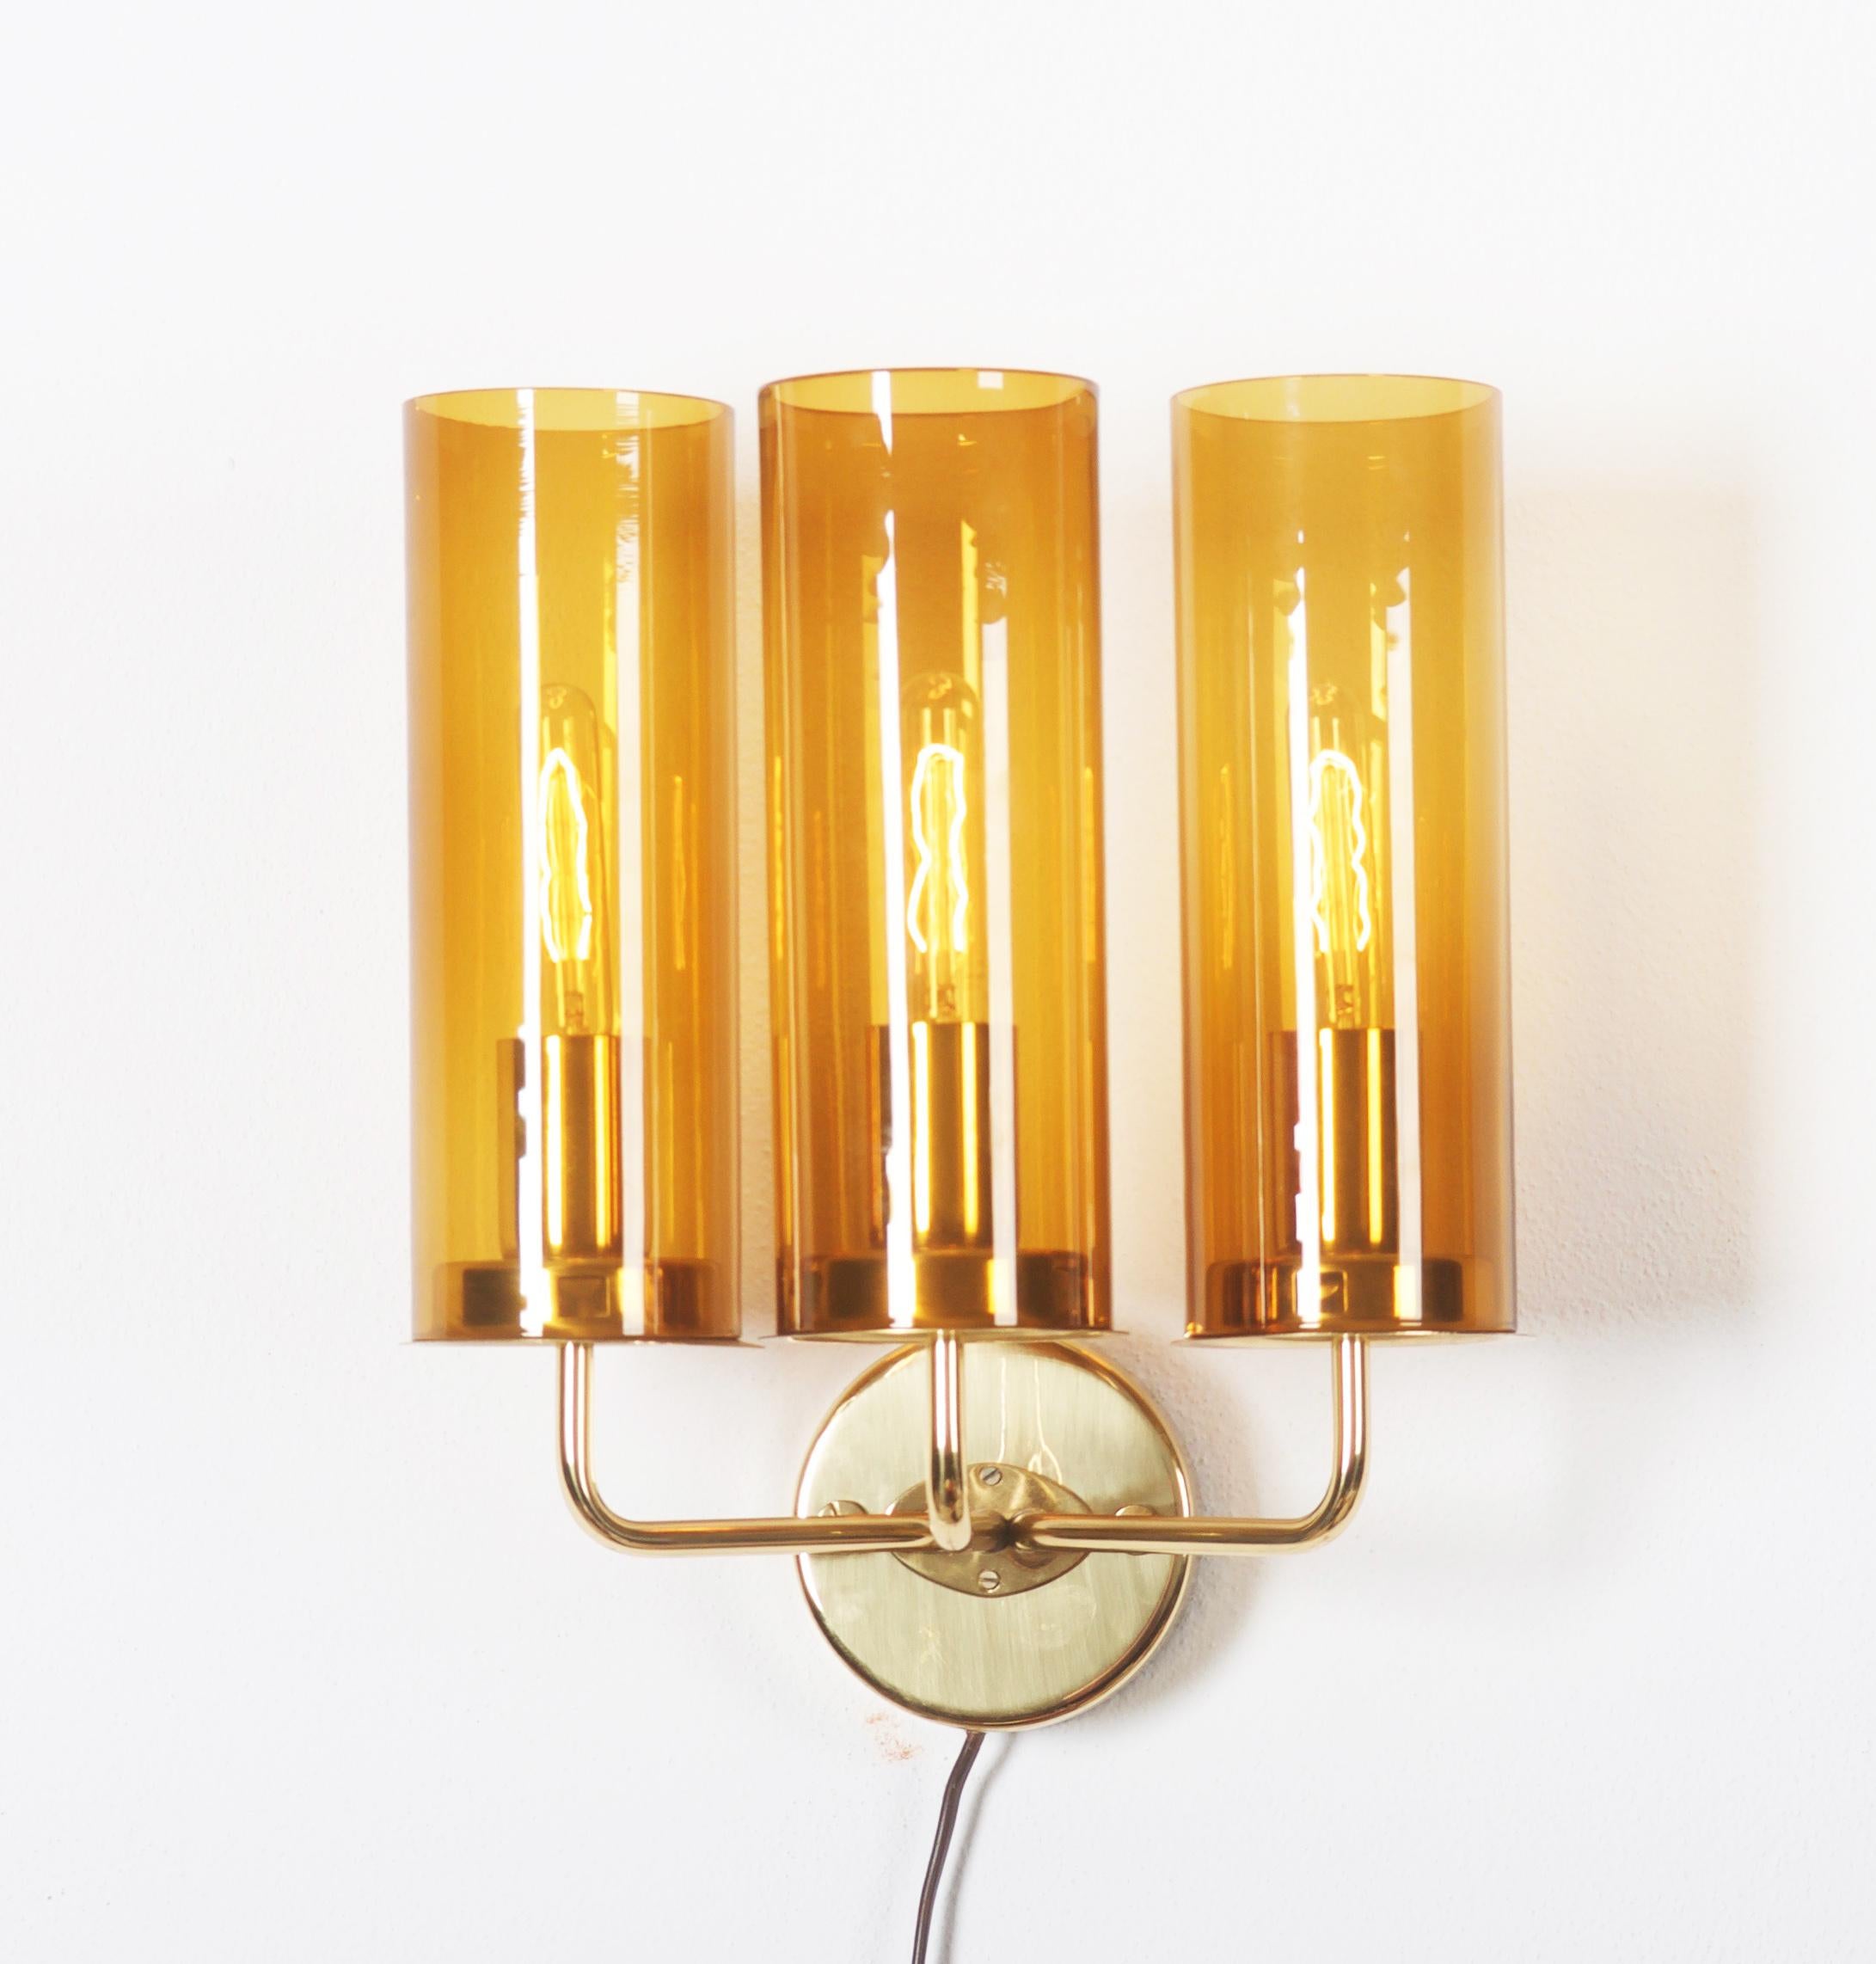 Modernist wall lamp in brass and amber-colored glass.
Model V 169/3. Designed and made in Sweden by Hans-Agne Jakobsson from, circa 1960 second half.
Fully working and in very good vintage condition. 
A pair available.